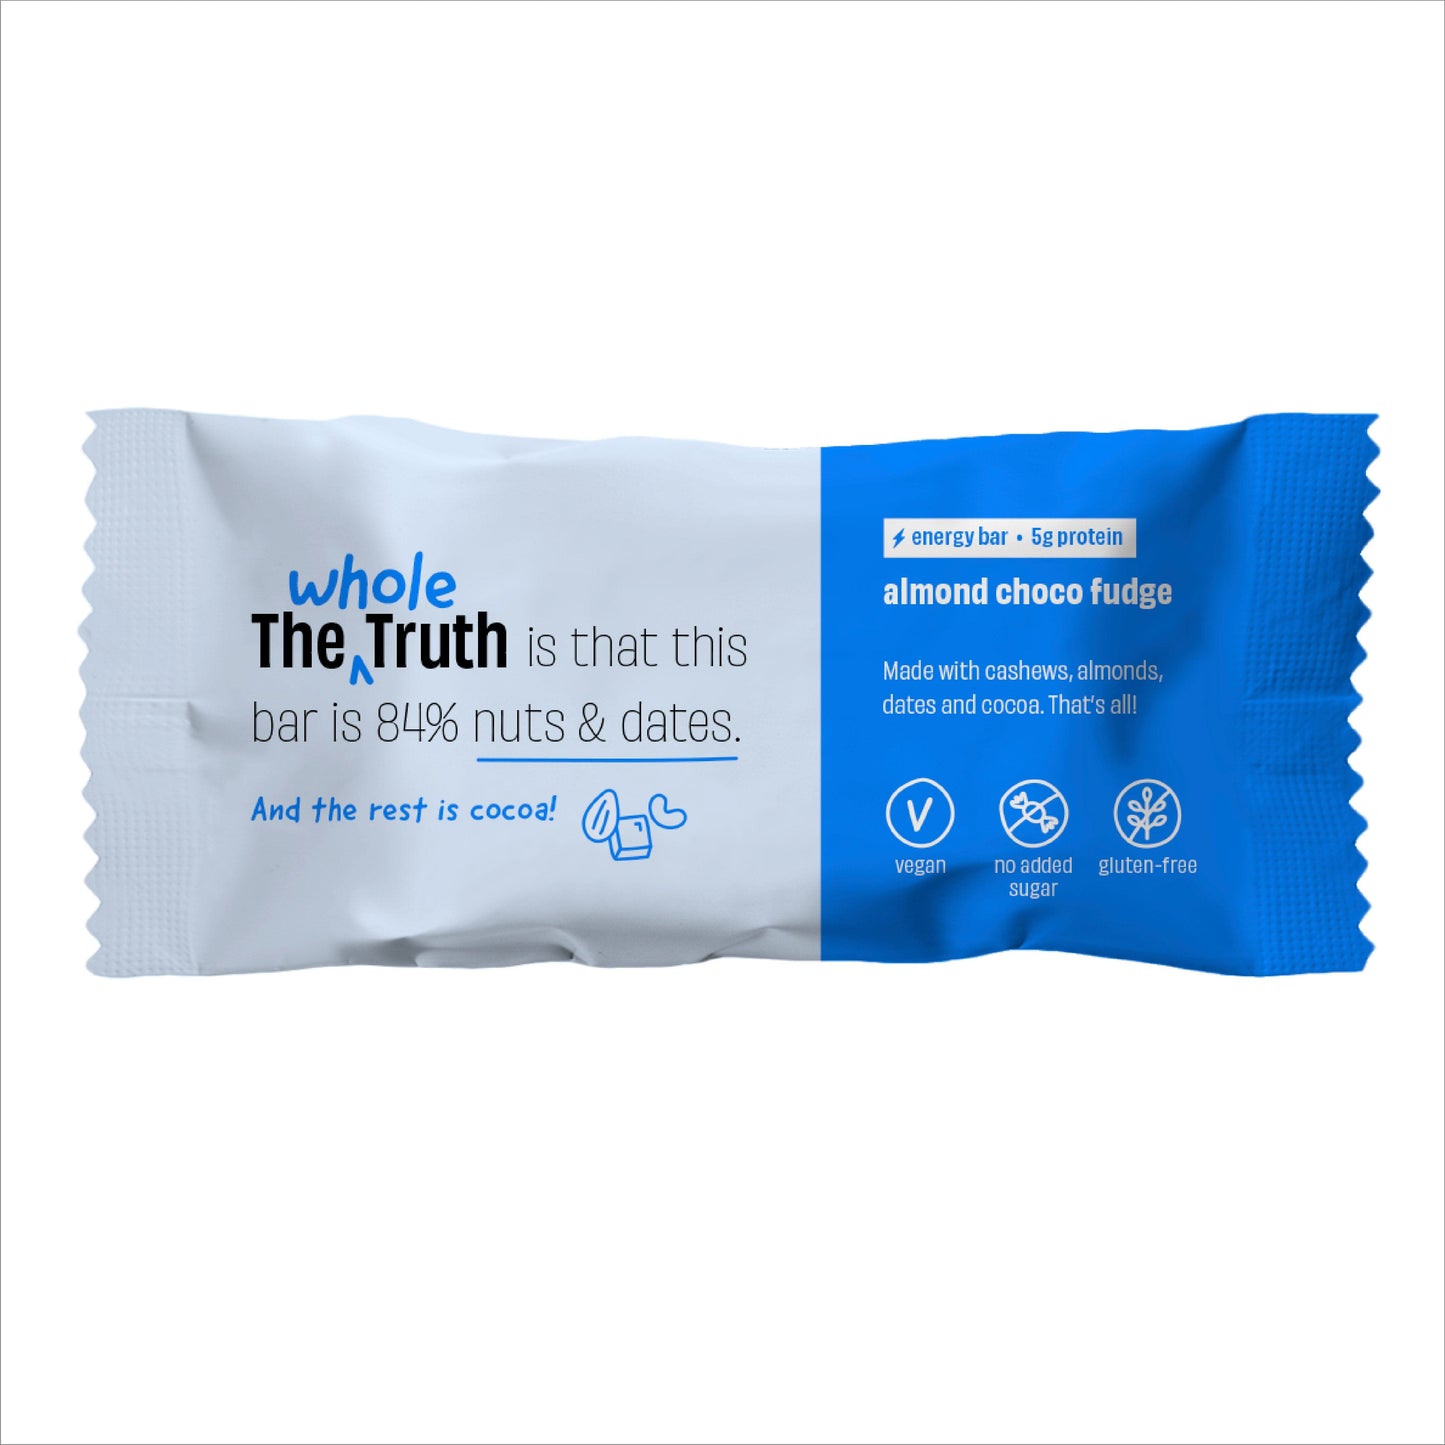 The Whole Truth Energy Bars - Almond Choco Fudge Pack of 10 (10 x 40g)